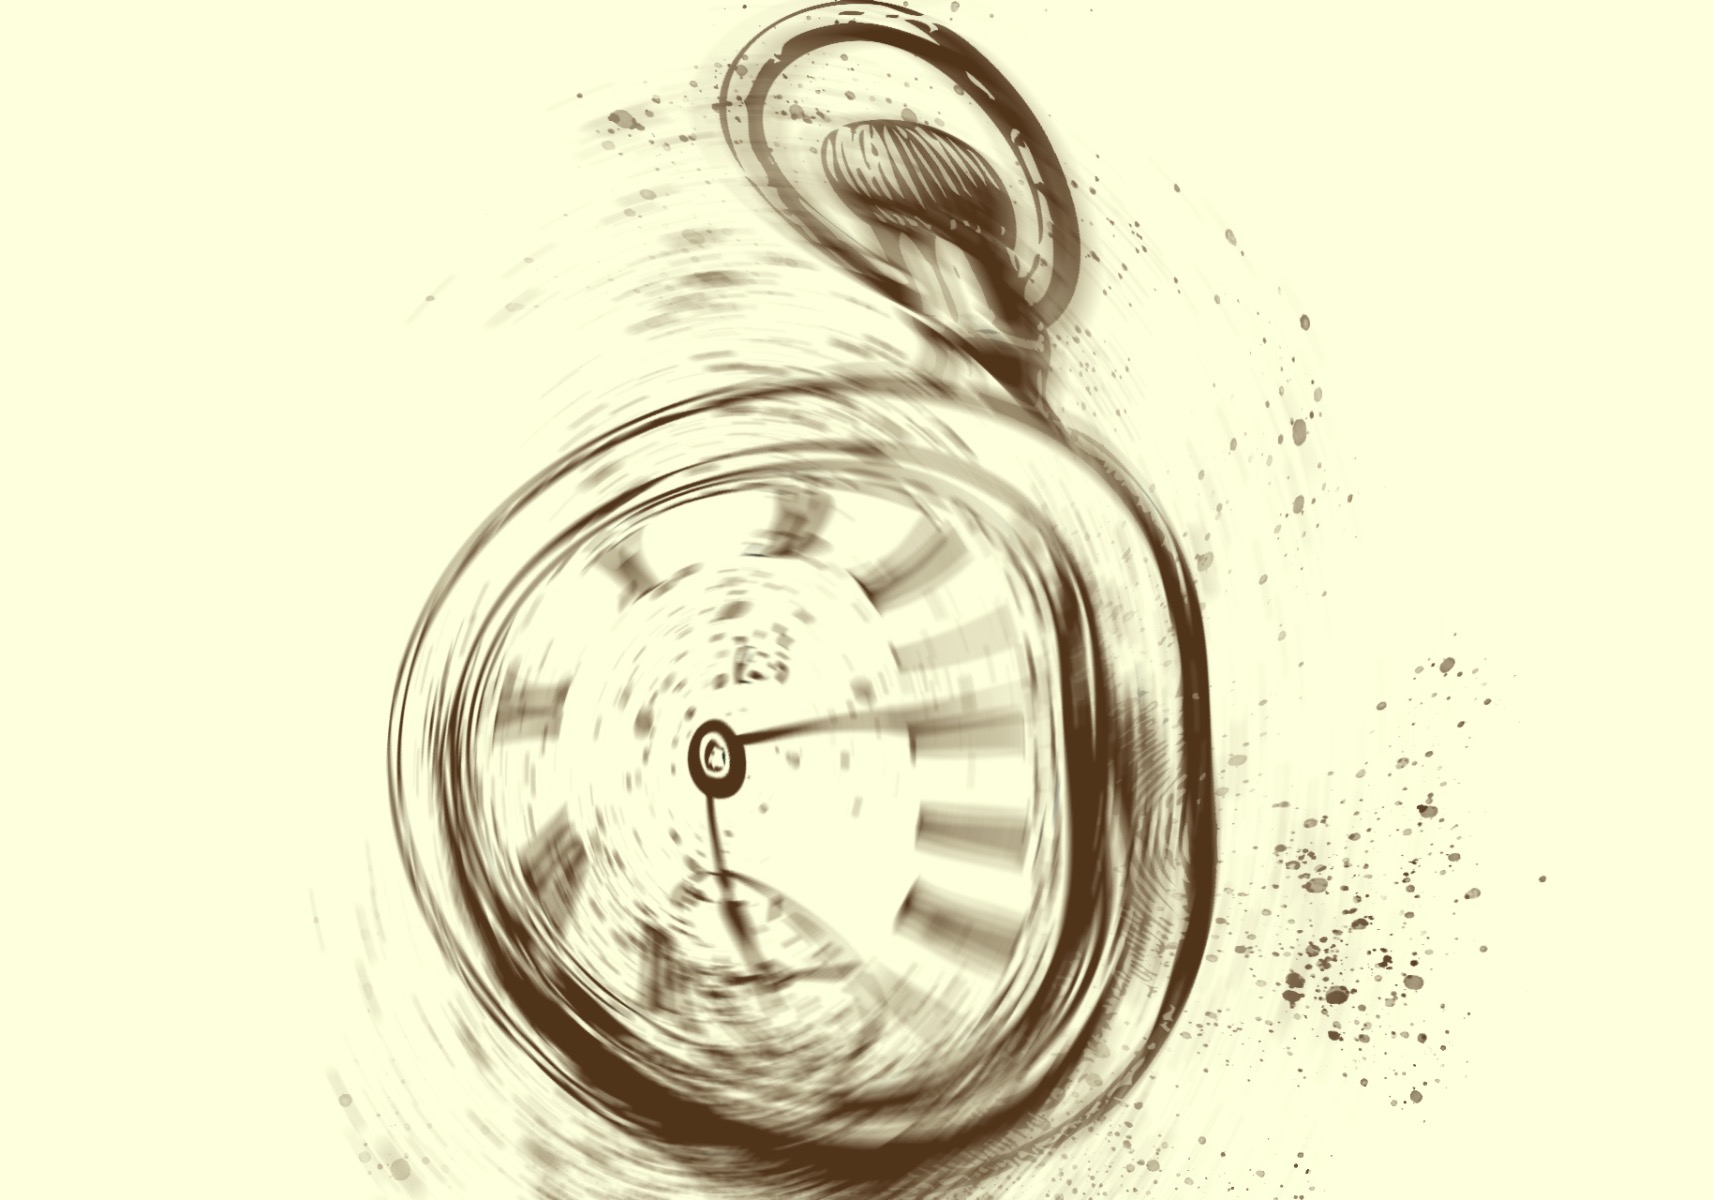 drawing of a clock